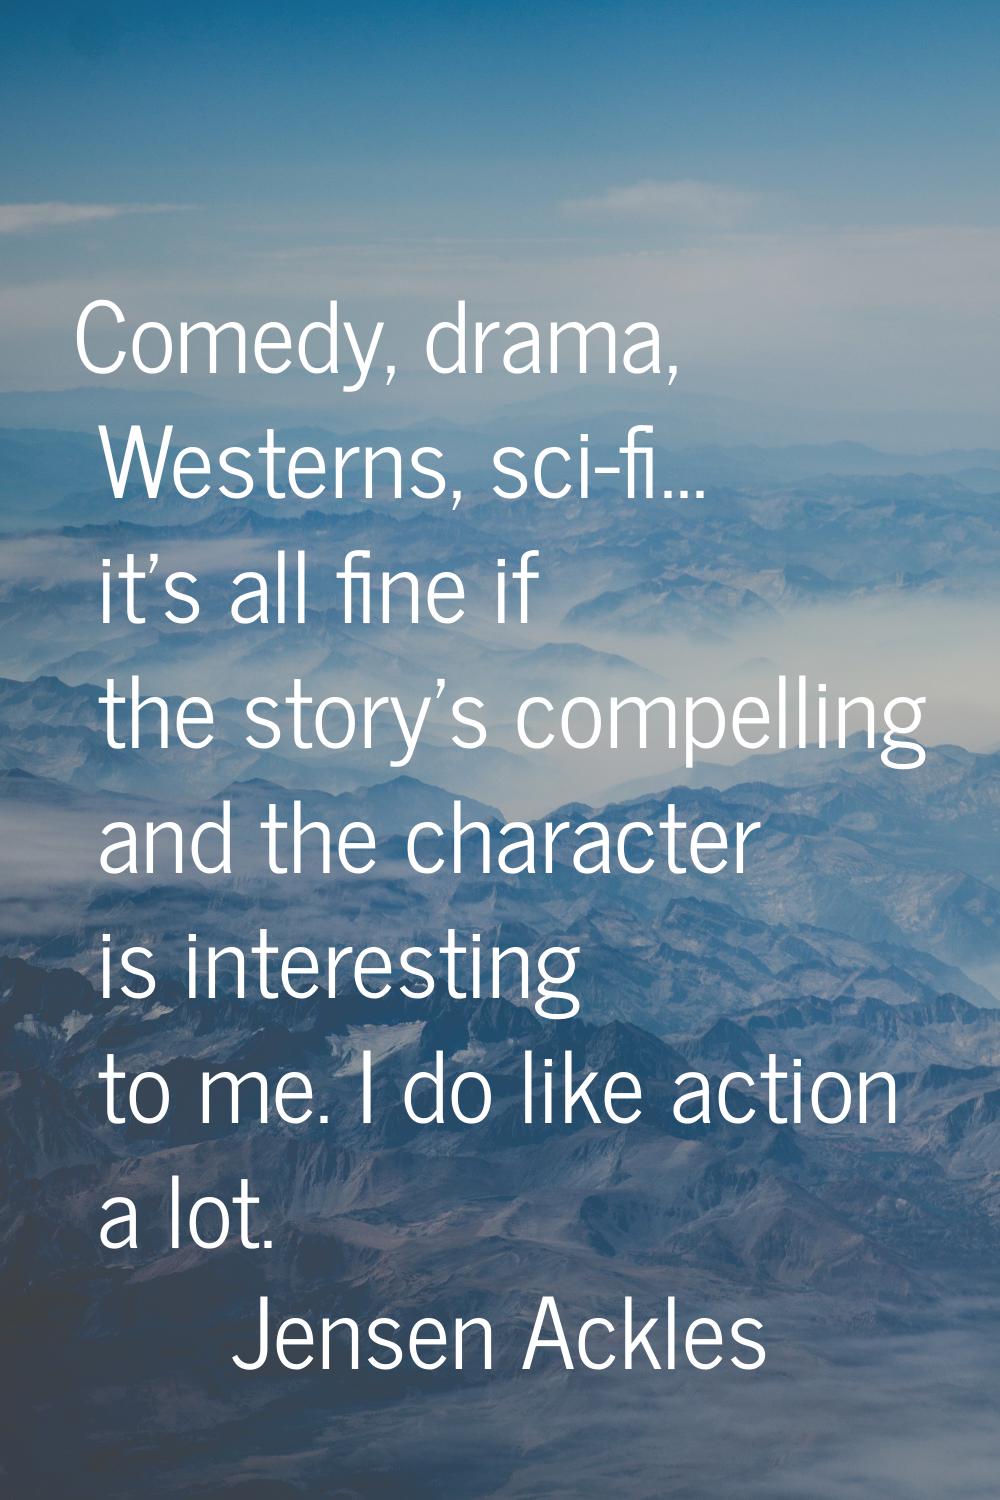 Comedy, drama, Westerns, sci-fi... it's all fine if the story's compelling and the character is int